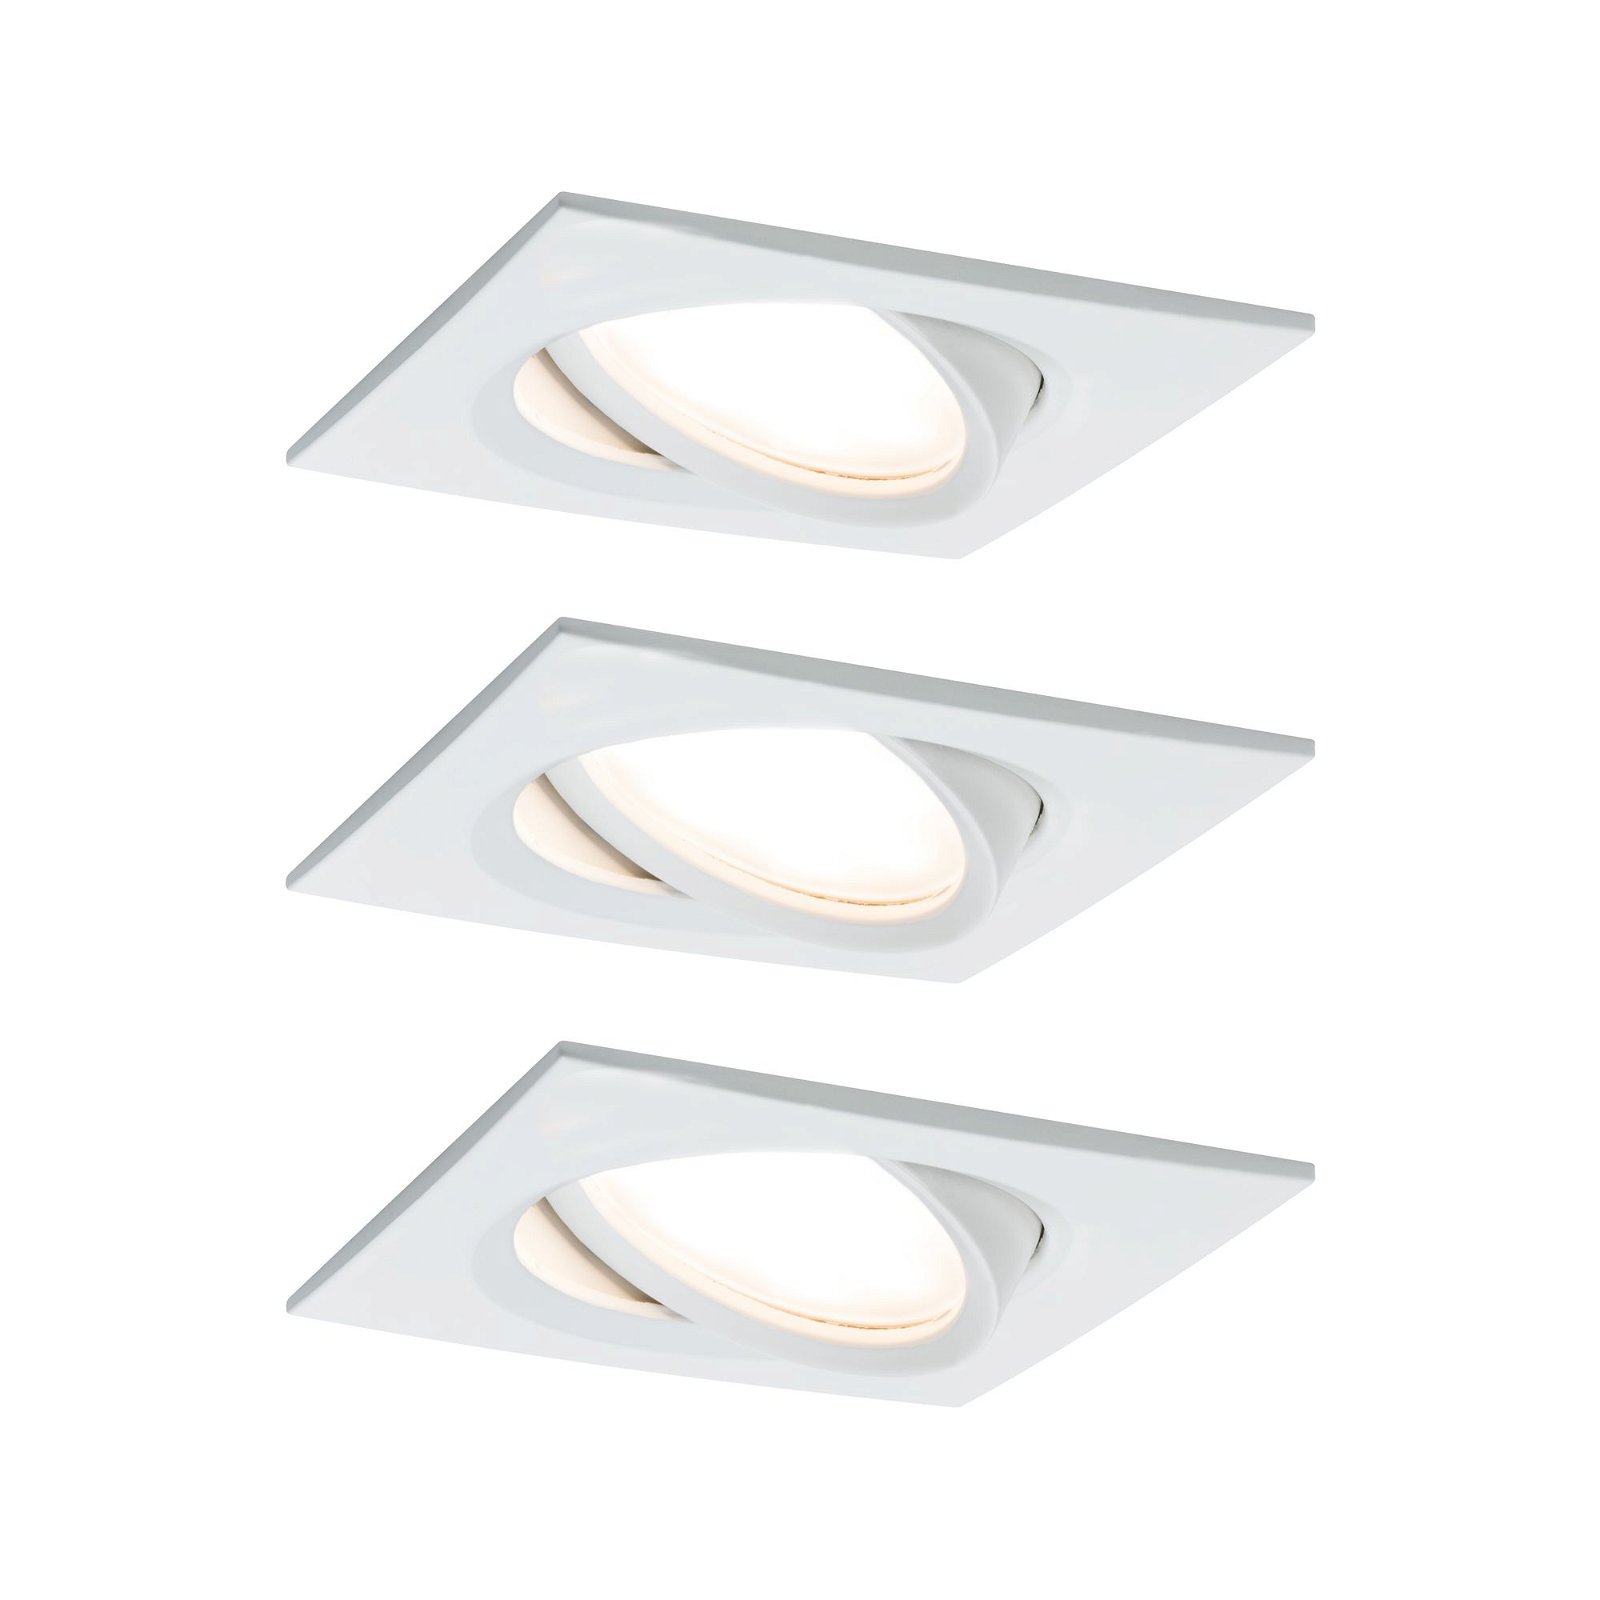 Recessed directly Nova manufacturer – from spotlight light Plus Premium solutions the